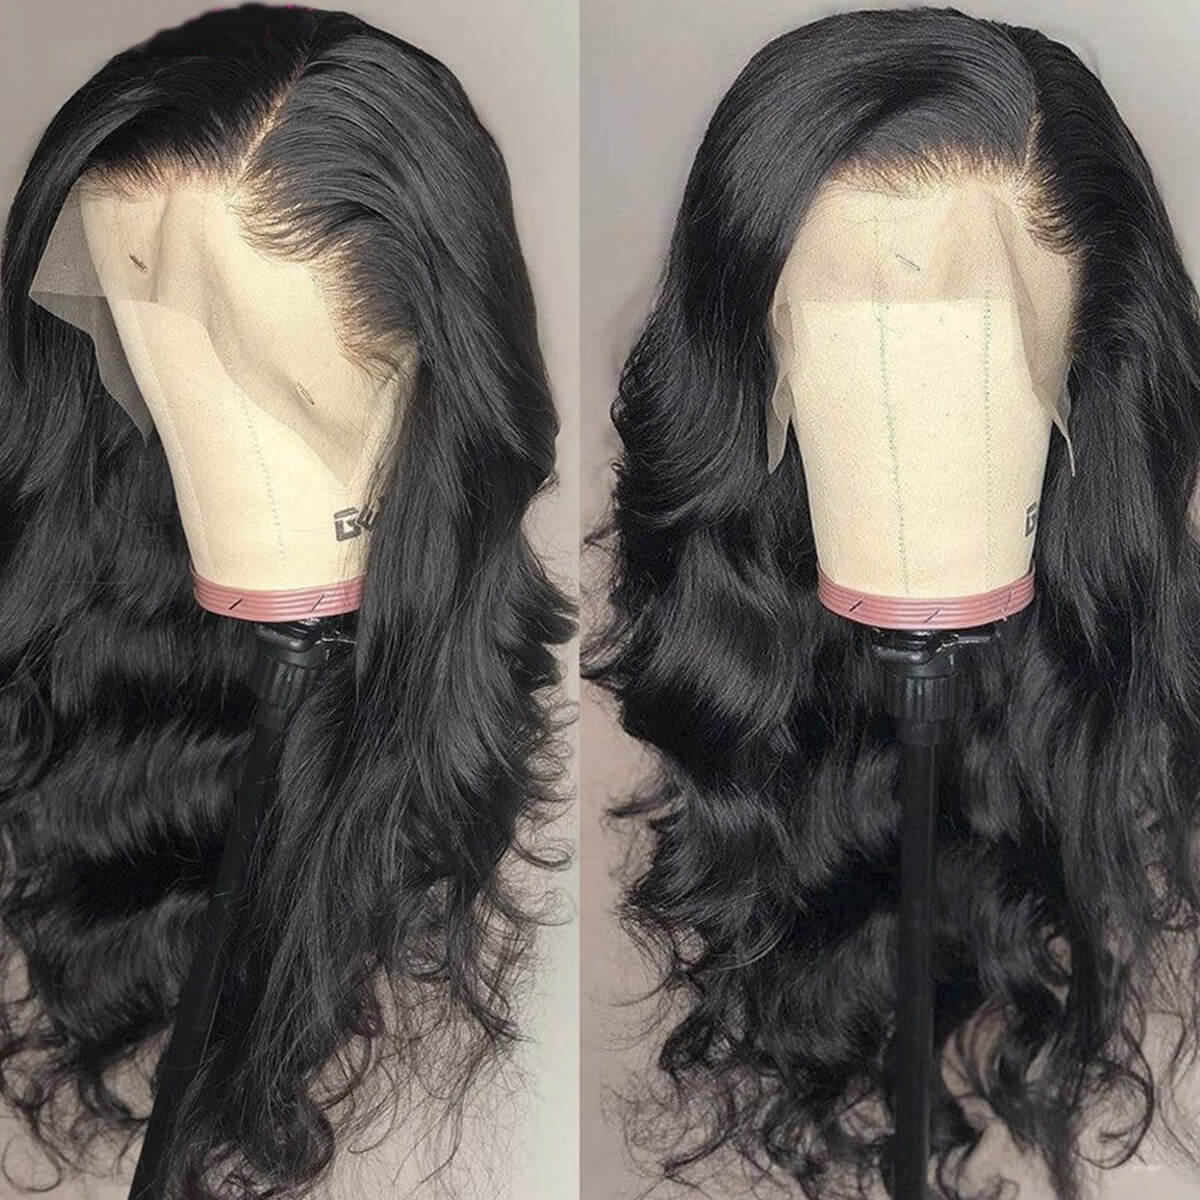 hd lace front wigs,hd lace body wave wigs,body wave hd lace wig,body wave hd lace front human hair wigs,body wave hd lace front wig,front lace wigs body wave,best hd lace front wigs,cheap hd lace front wigs